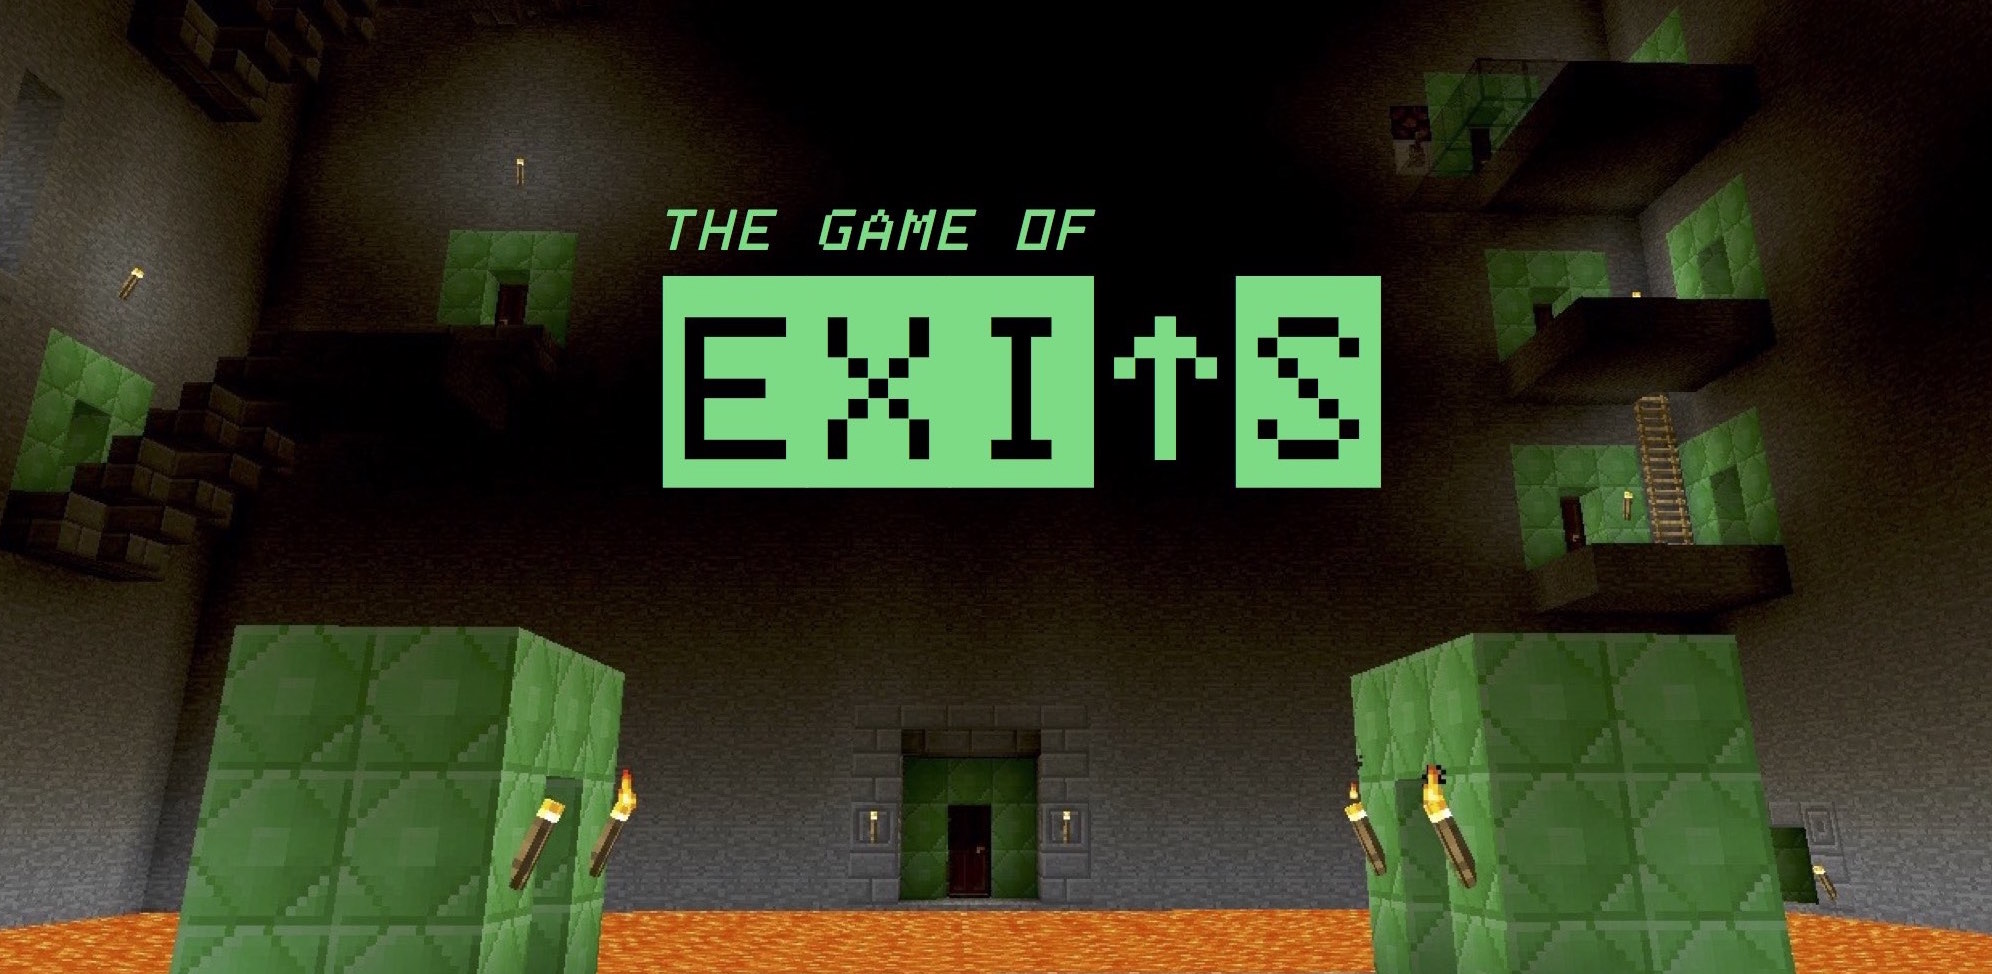 The Game of Exits